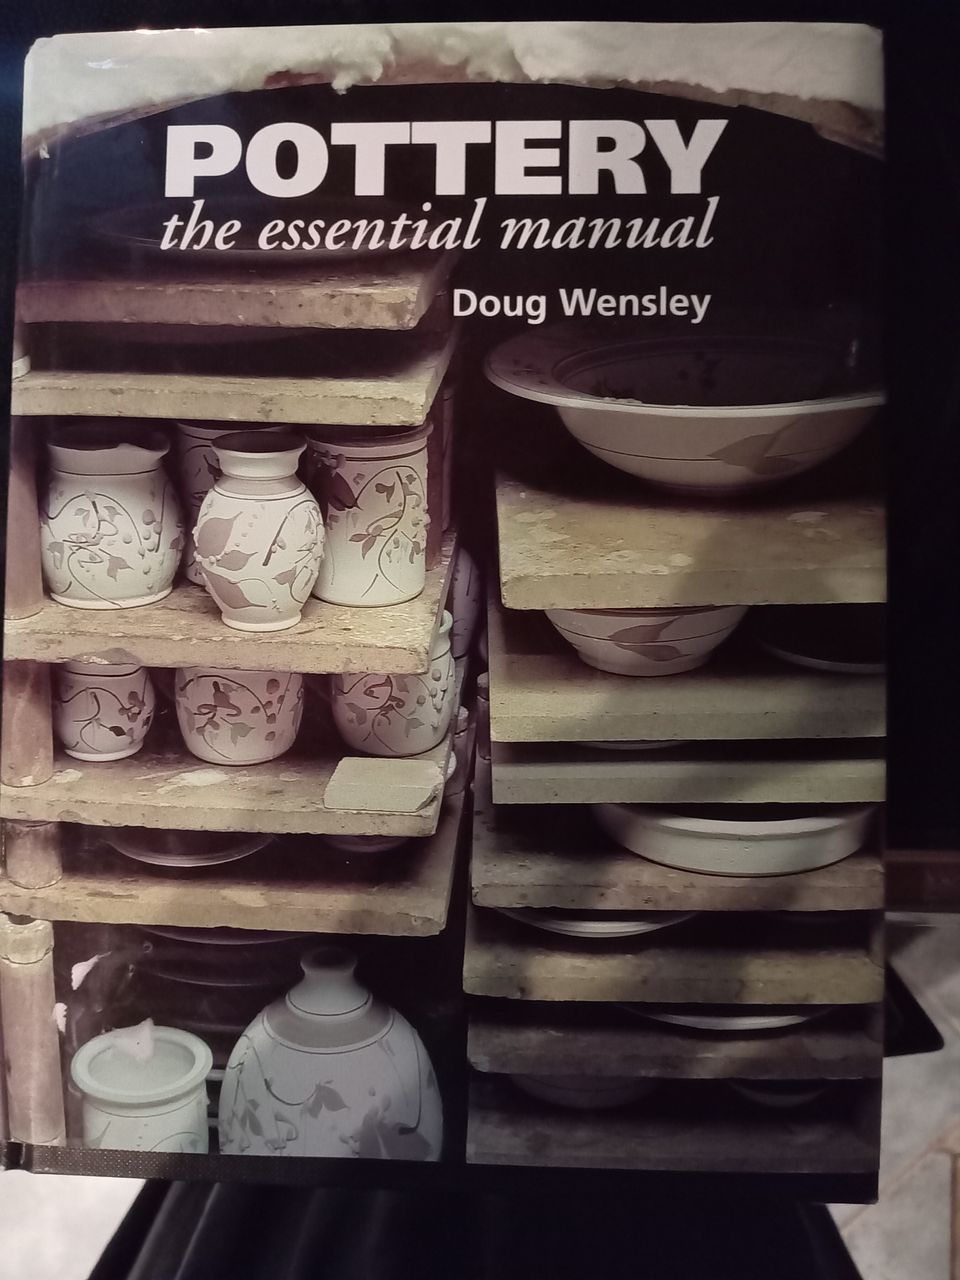 Potter the essential manual